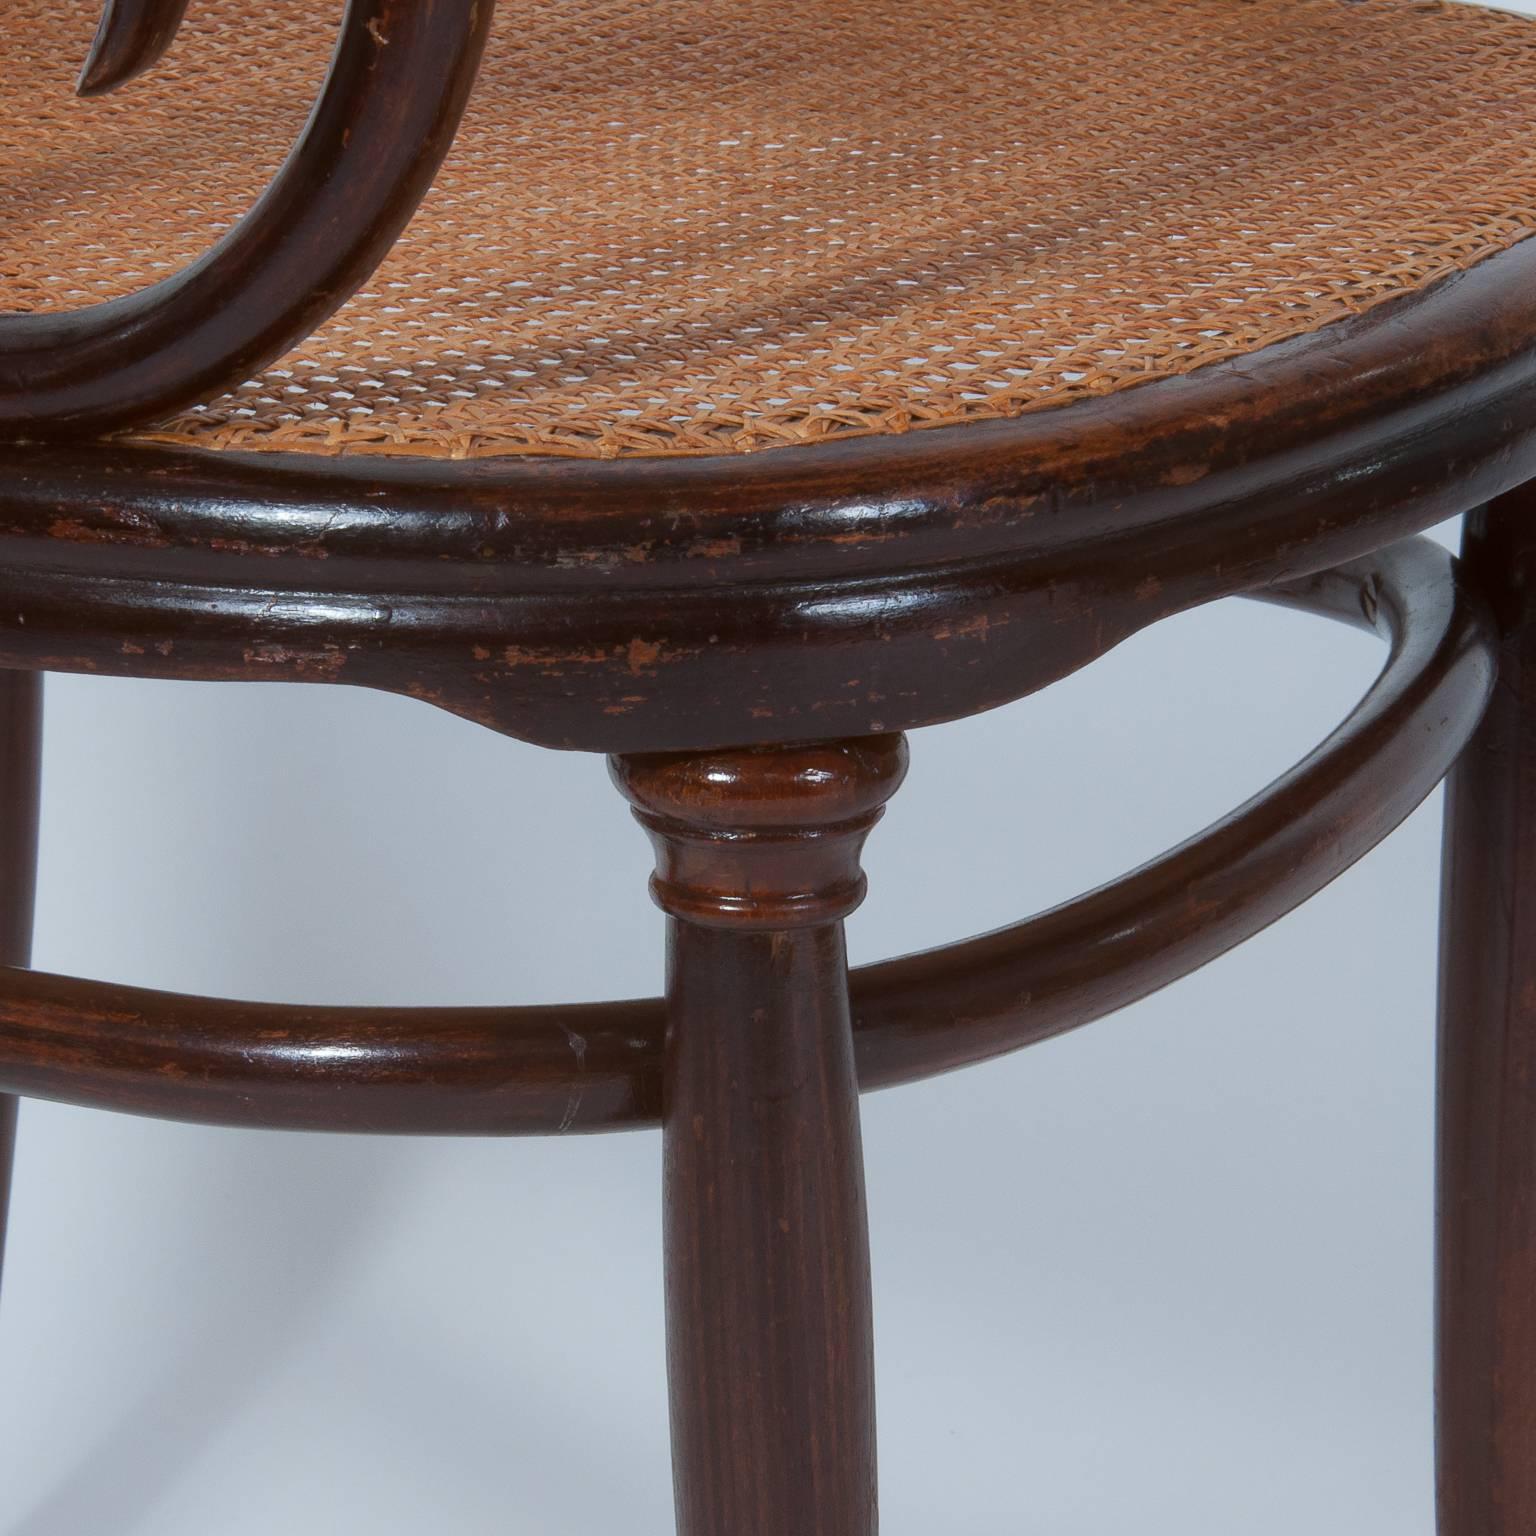 Antique Thonet Bentwood Armchair Fauteuil No. 2, desgned 1865, manufactured 1895 For Sale 1